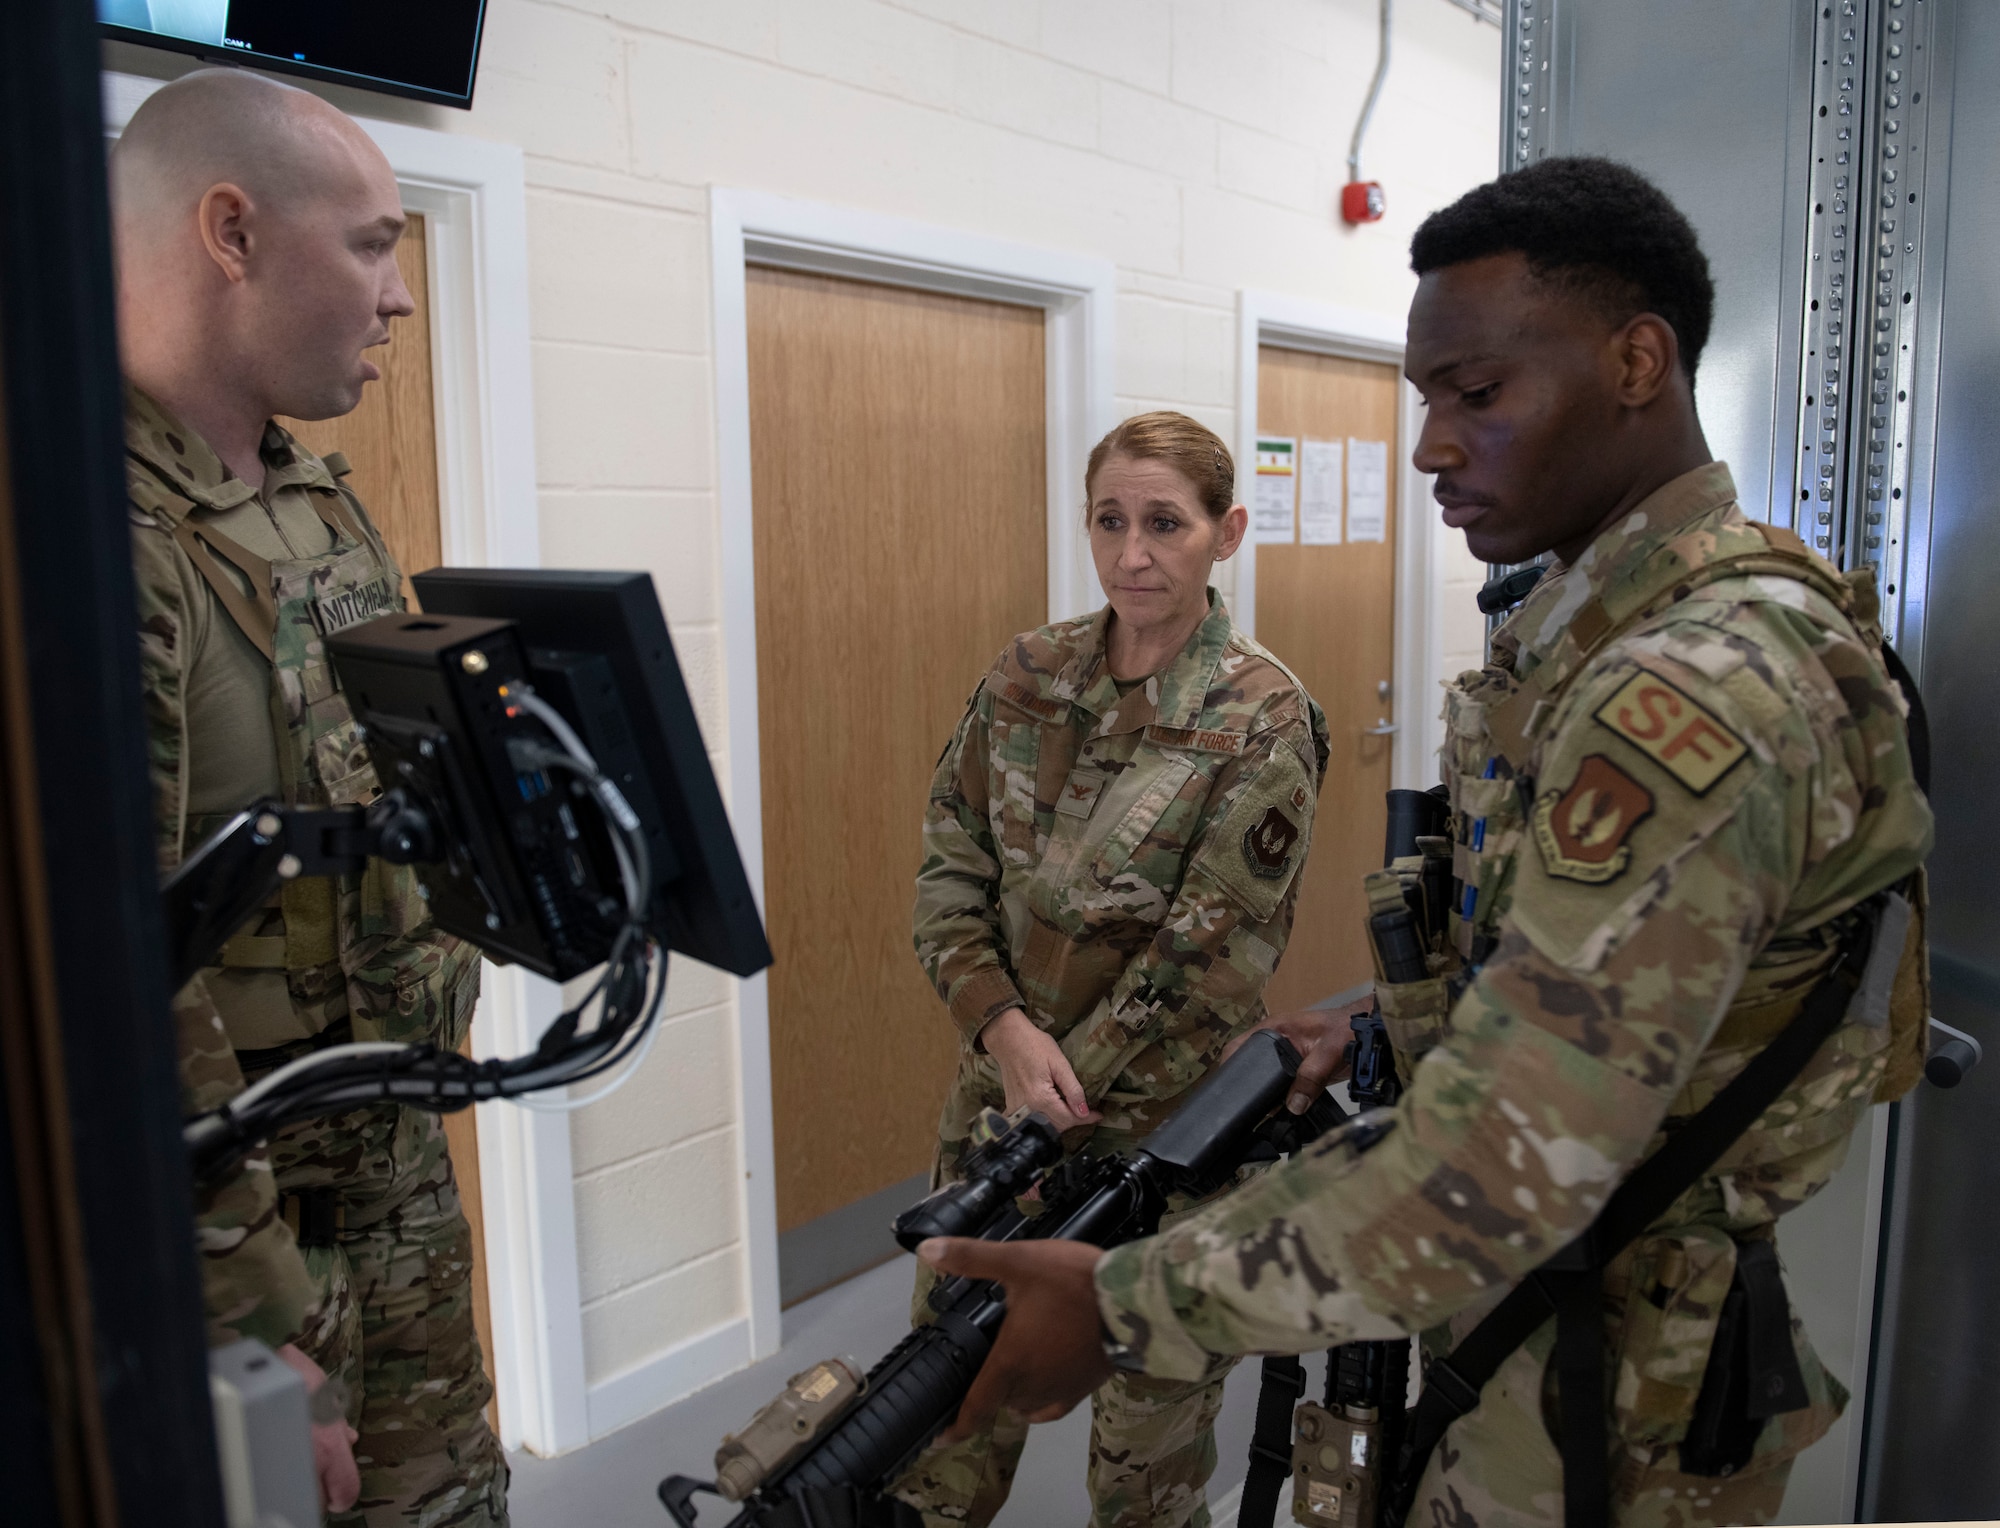 U.S. Air Force Staff Sgt. Kevin Mitchell, 422d Security Forces Squadron (SFS) non-commissioned officer in charge of the armory, left, and Airman 1st Class Daniel Nwaobi, 422d SFS security response team member, demonstrate the new radio-frequency identification weapon tracking system for Col. Lisa Wildman, 501st Combat Support Wing vice commander, at RAF Croughton, England, April 6, 2022. The armory was the first in the entire Air Force to fully integrate a RFID tracking system. (U.S. Air Force photo by Senior Airman Jason W. Cochran)